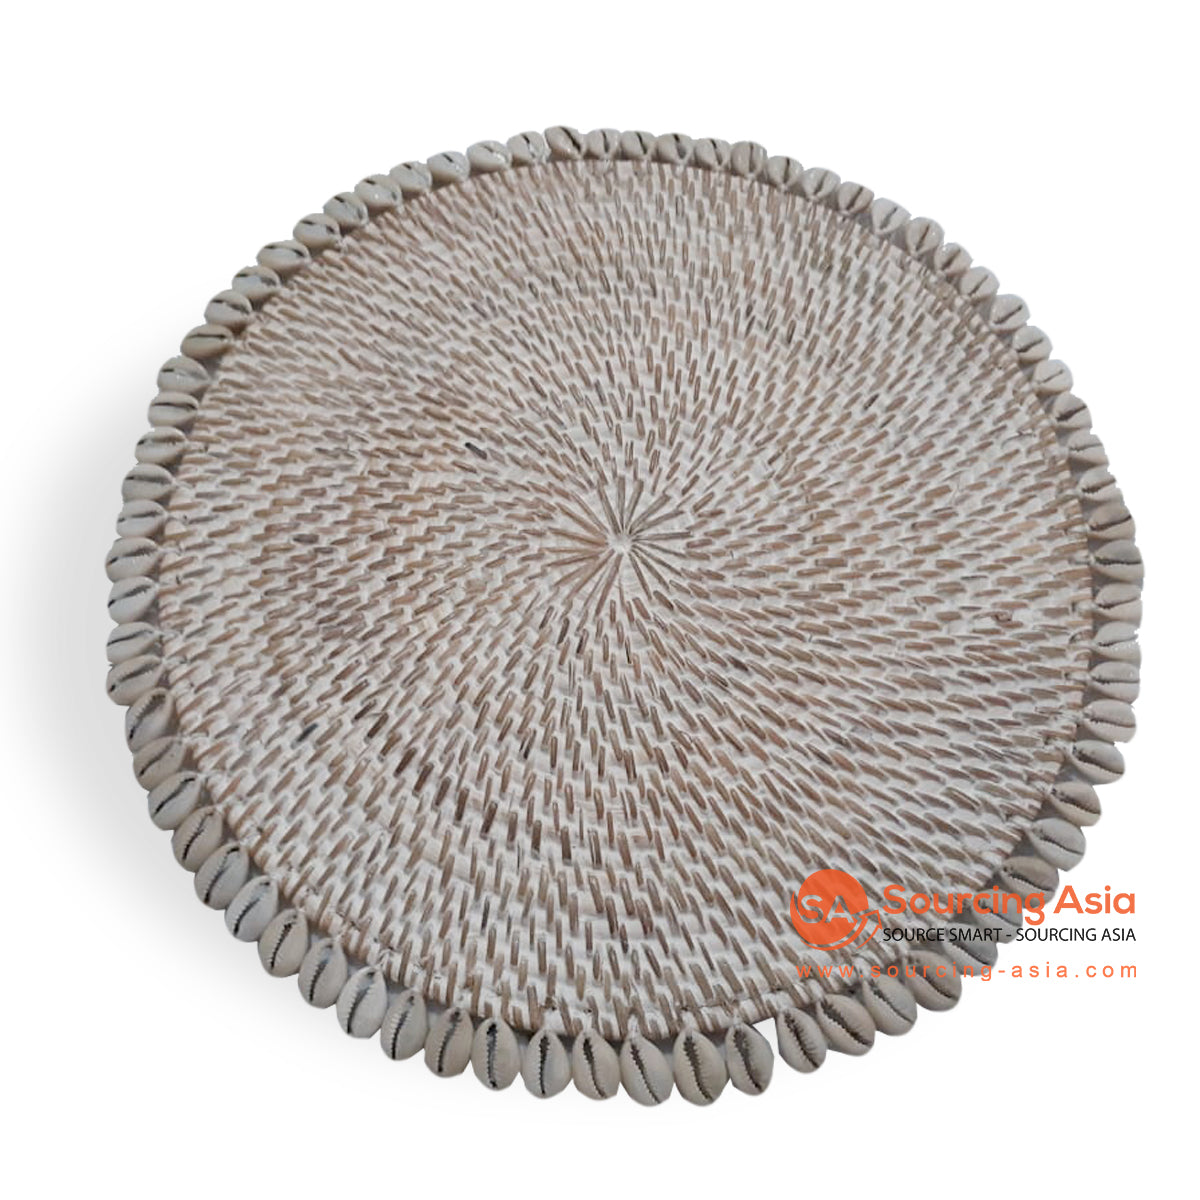 ALI064-1 WHITE WASH RATTAN ROUND PLACEMAT WITH SHELL